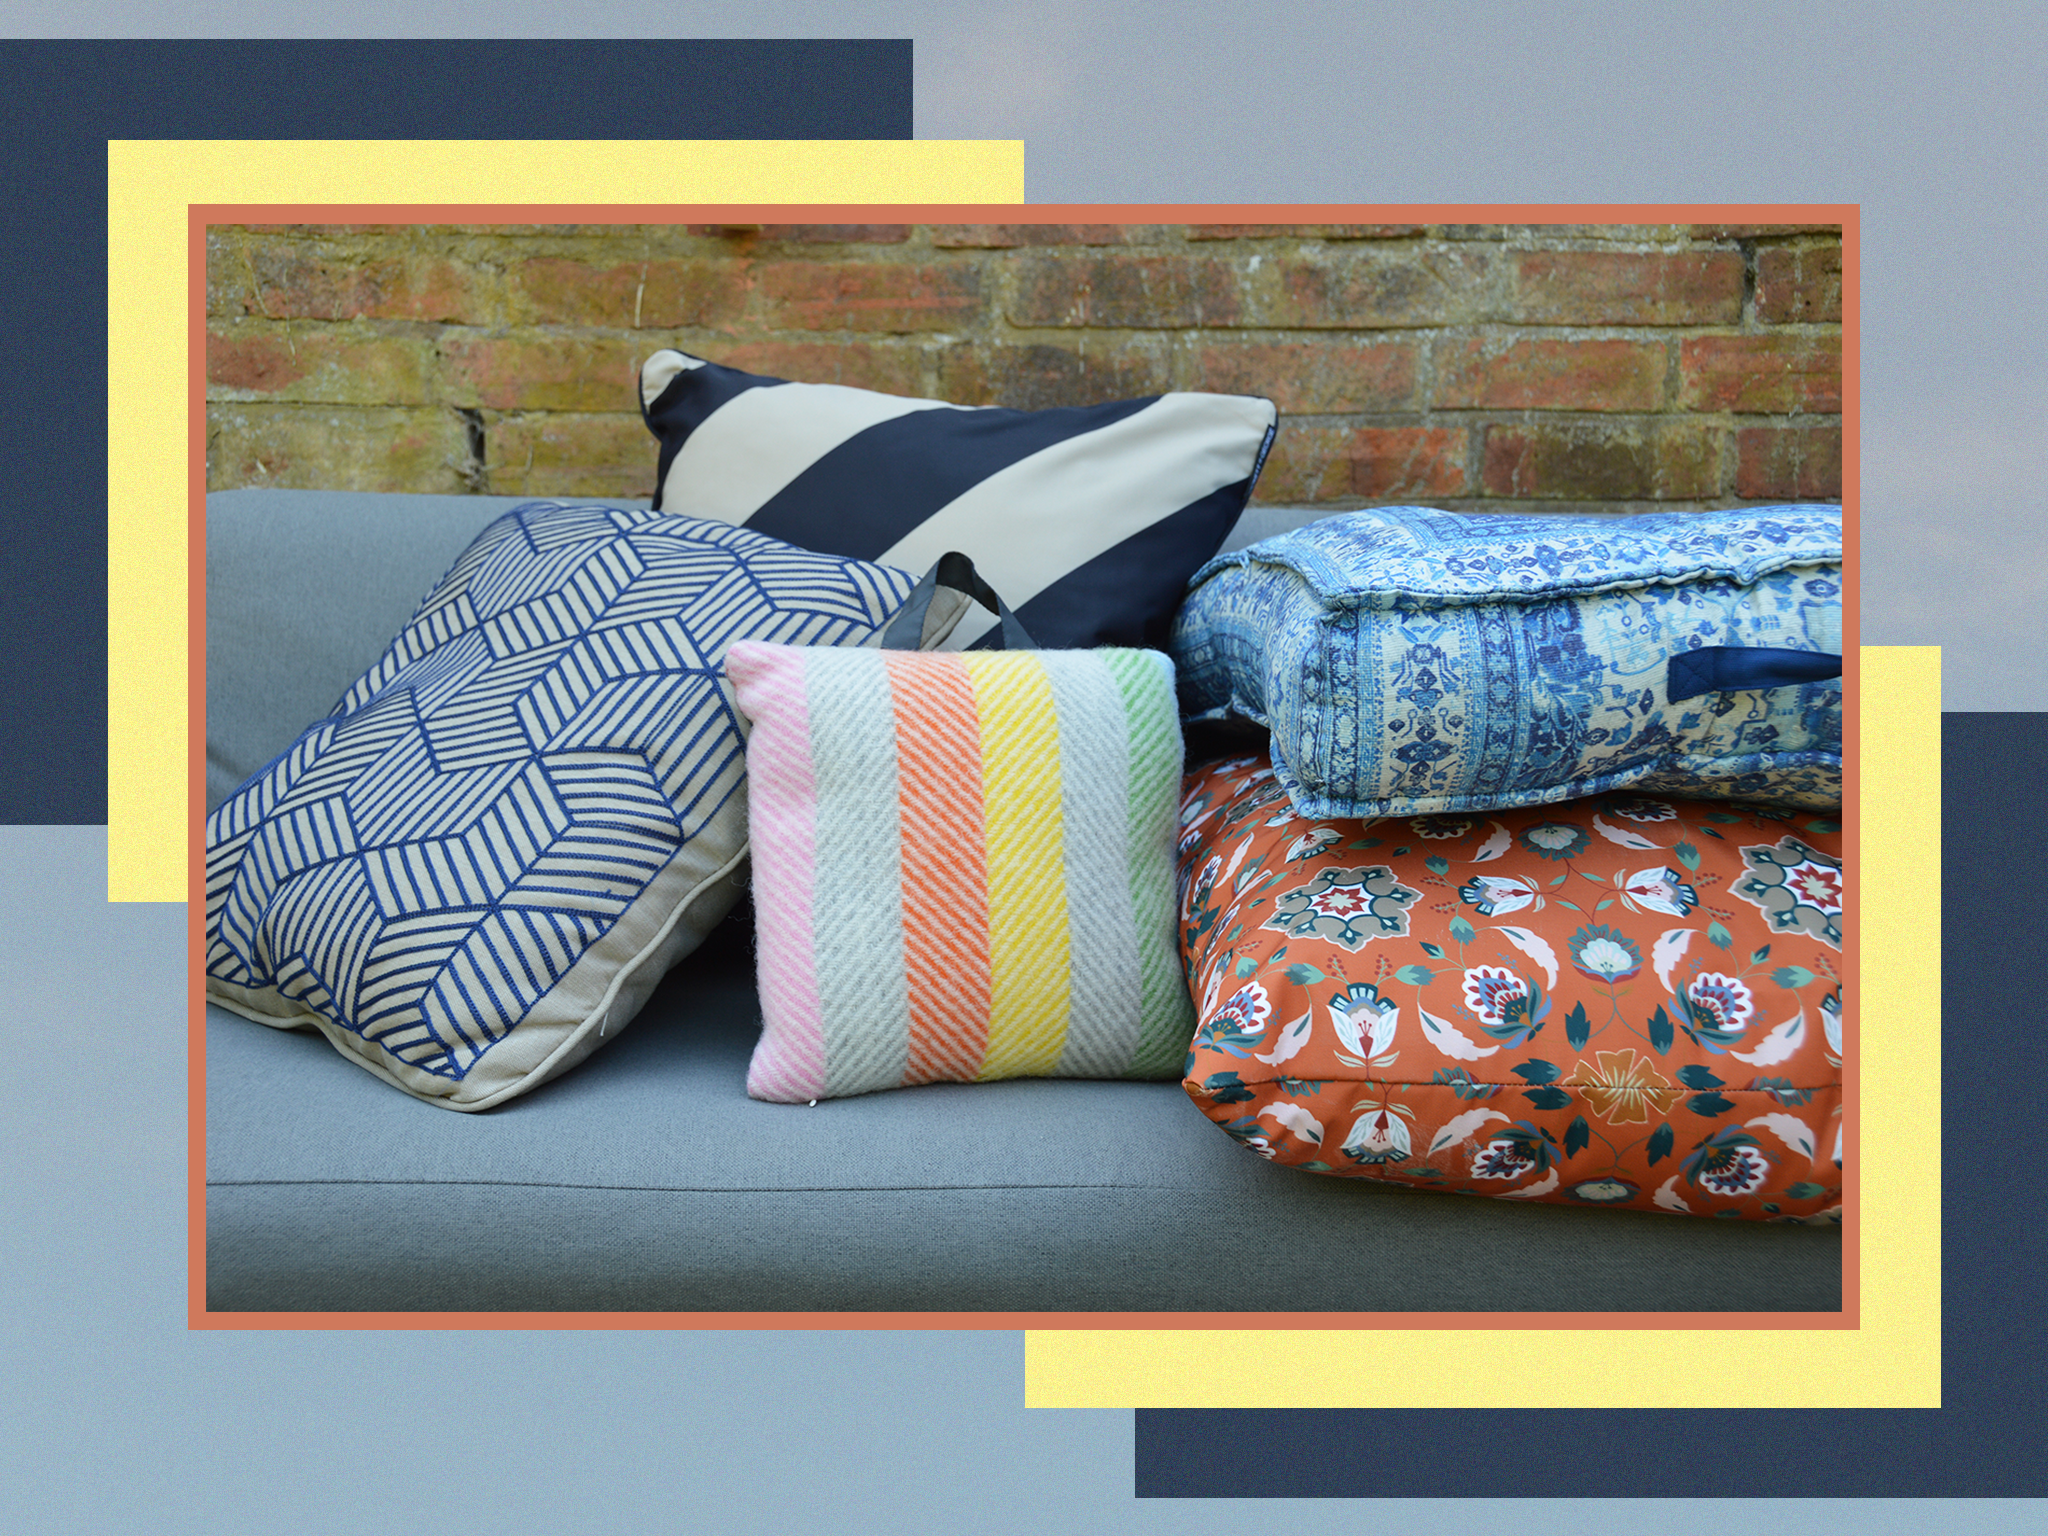 https://static.independent.co.uk/2023/06/16/15/outdoor%20cushions.png